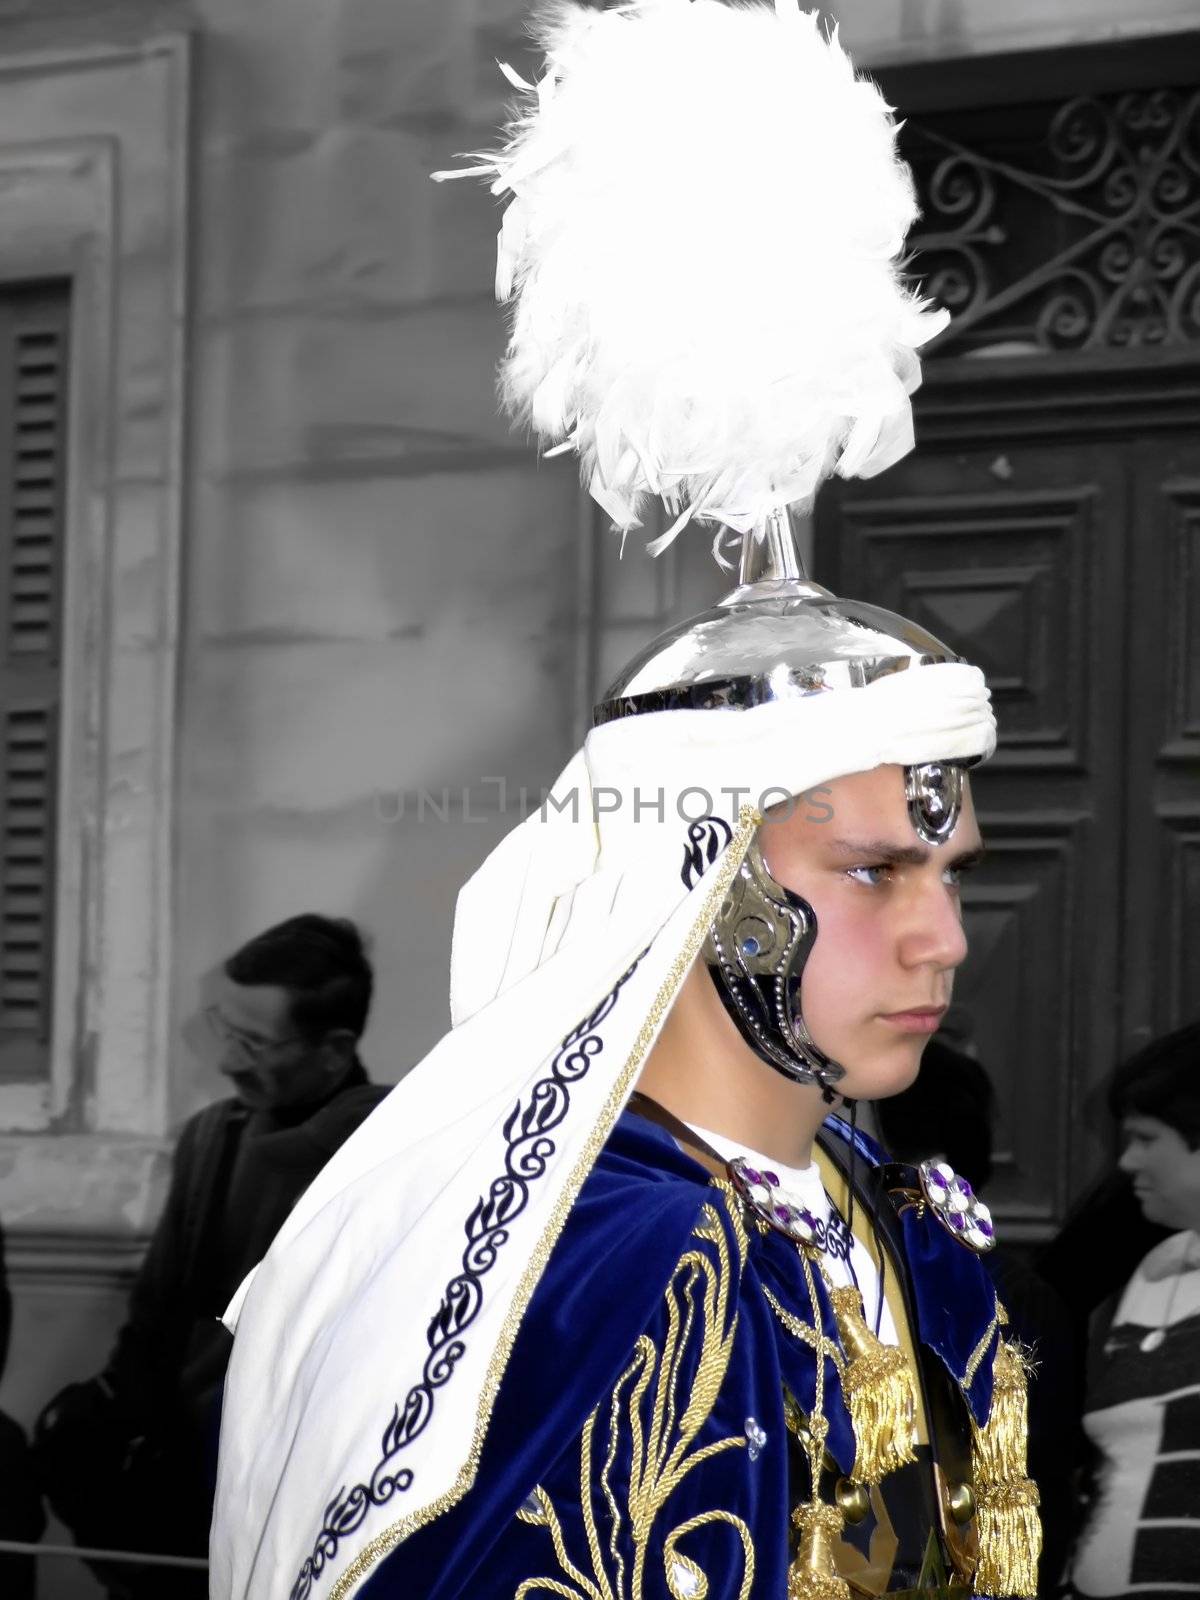 Biblical Series - Imagery depicting re-enactment of various Biblical figures which had a significant role in the passion of the Christ. Good Friday Procession in the town of Luqa in the Mediterranean island of Malta.